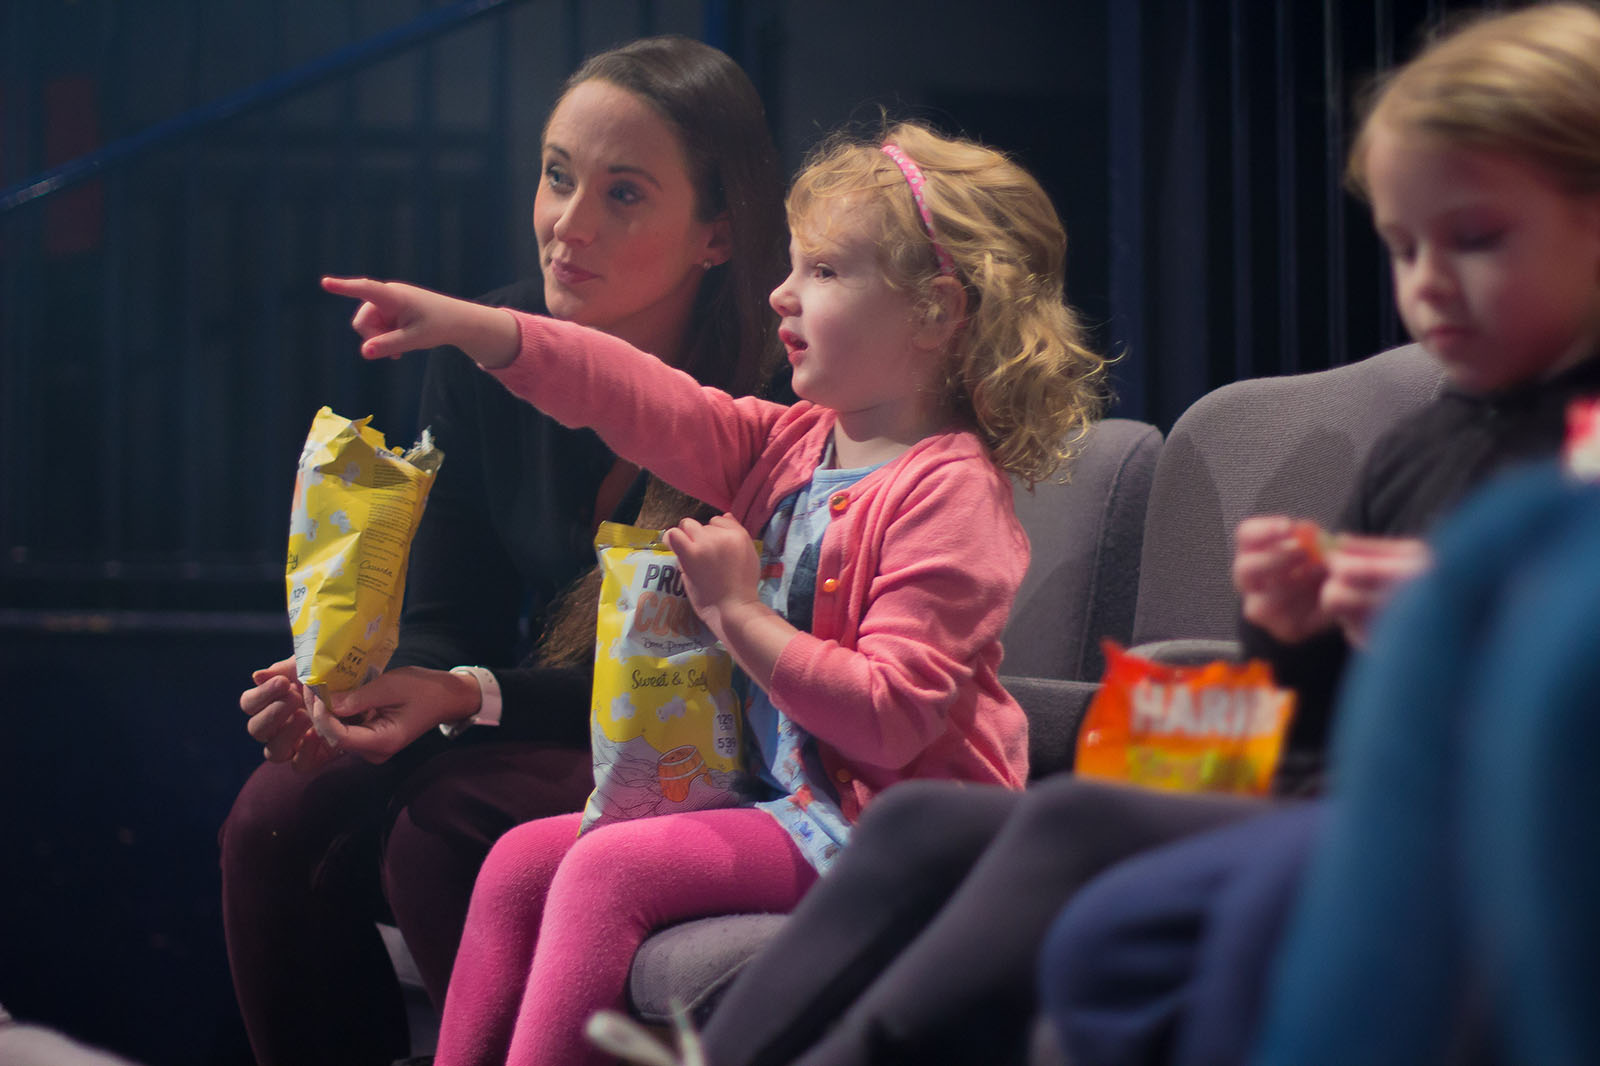 young girl pointing at a cinema screen holding popcorn